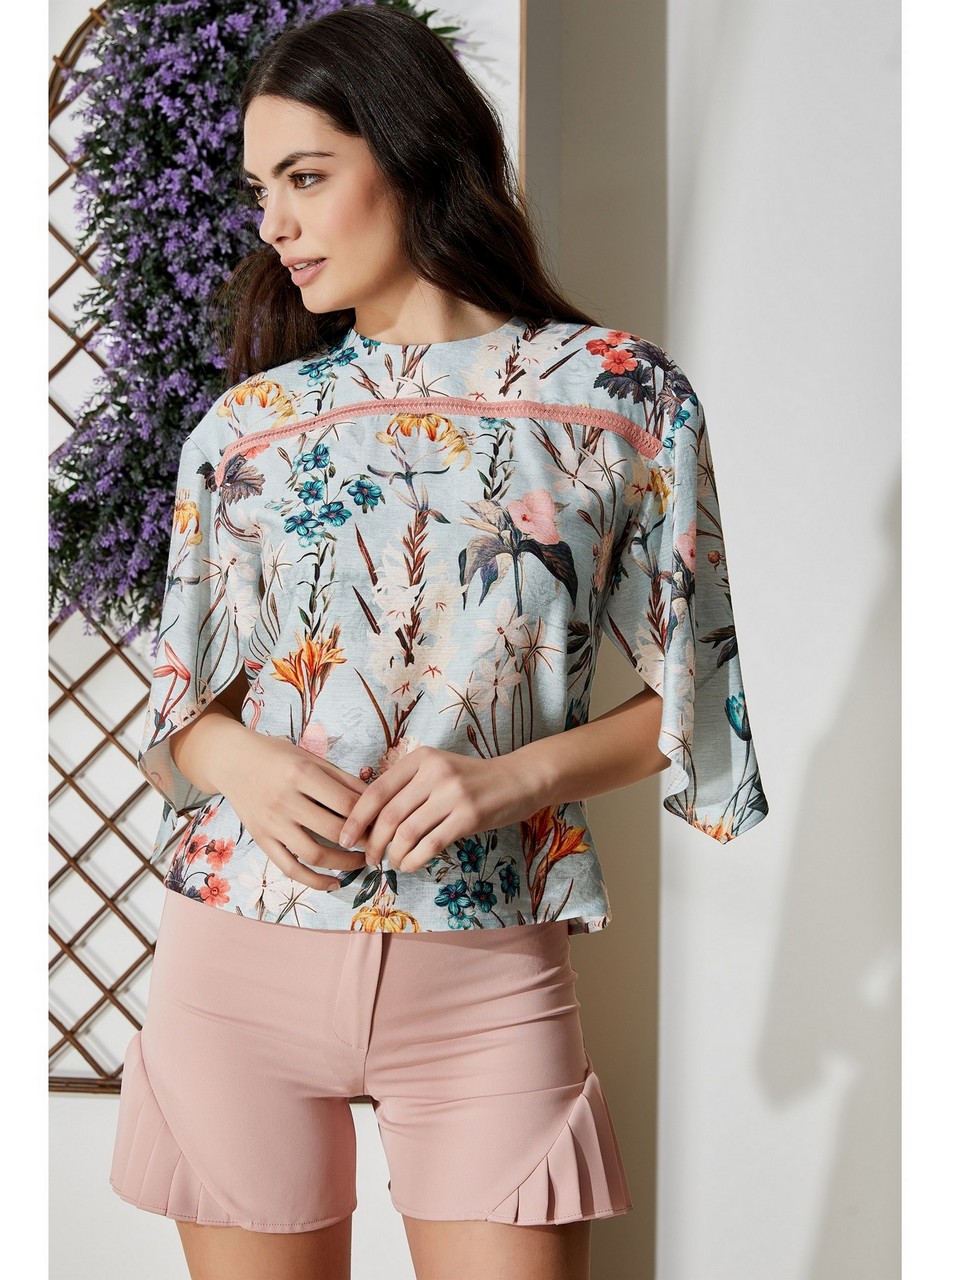 Round Neck Floral Patterned Blouse